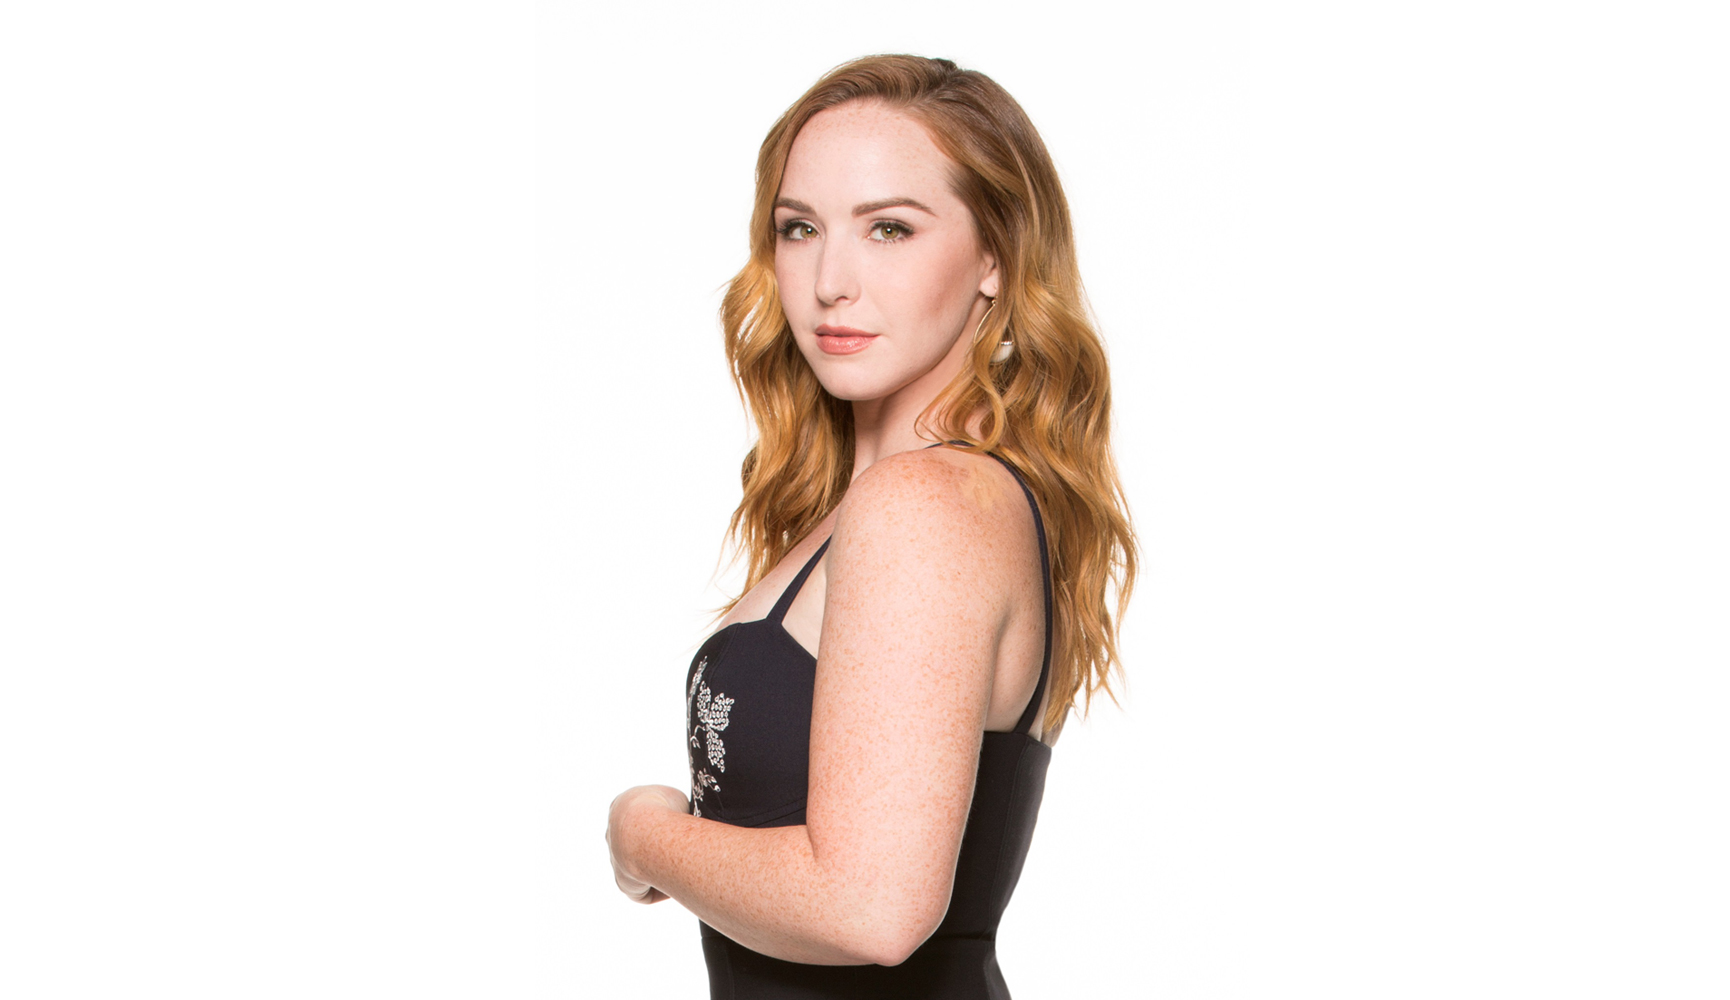 Camryn Grimes Opens Up About Growing Up On Y&R and IRL - globaltv.